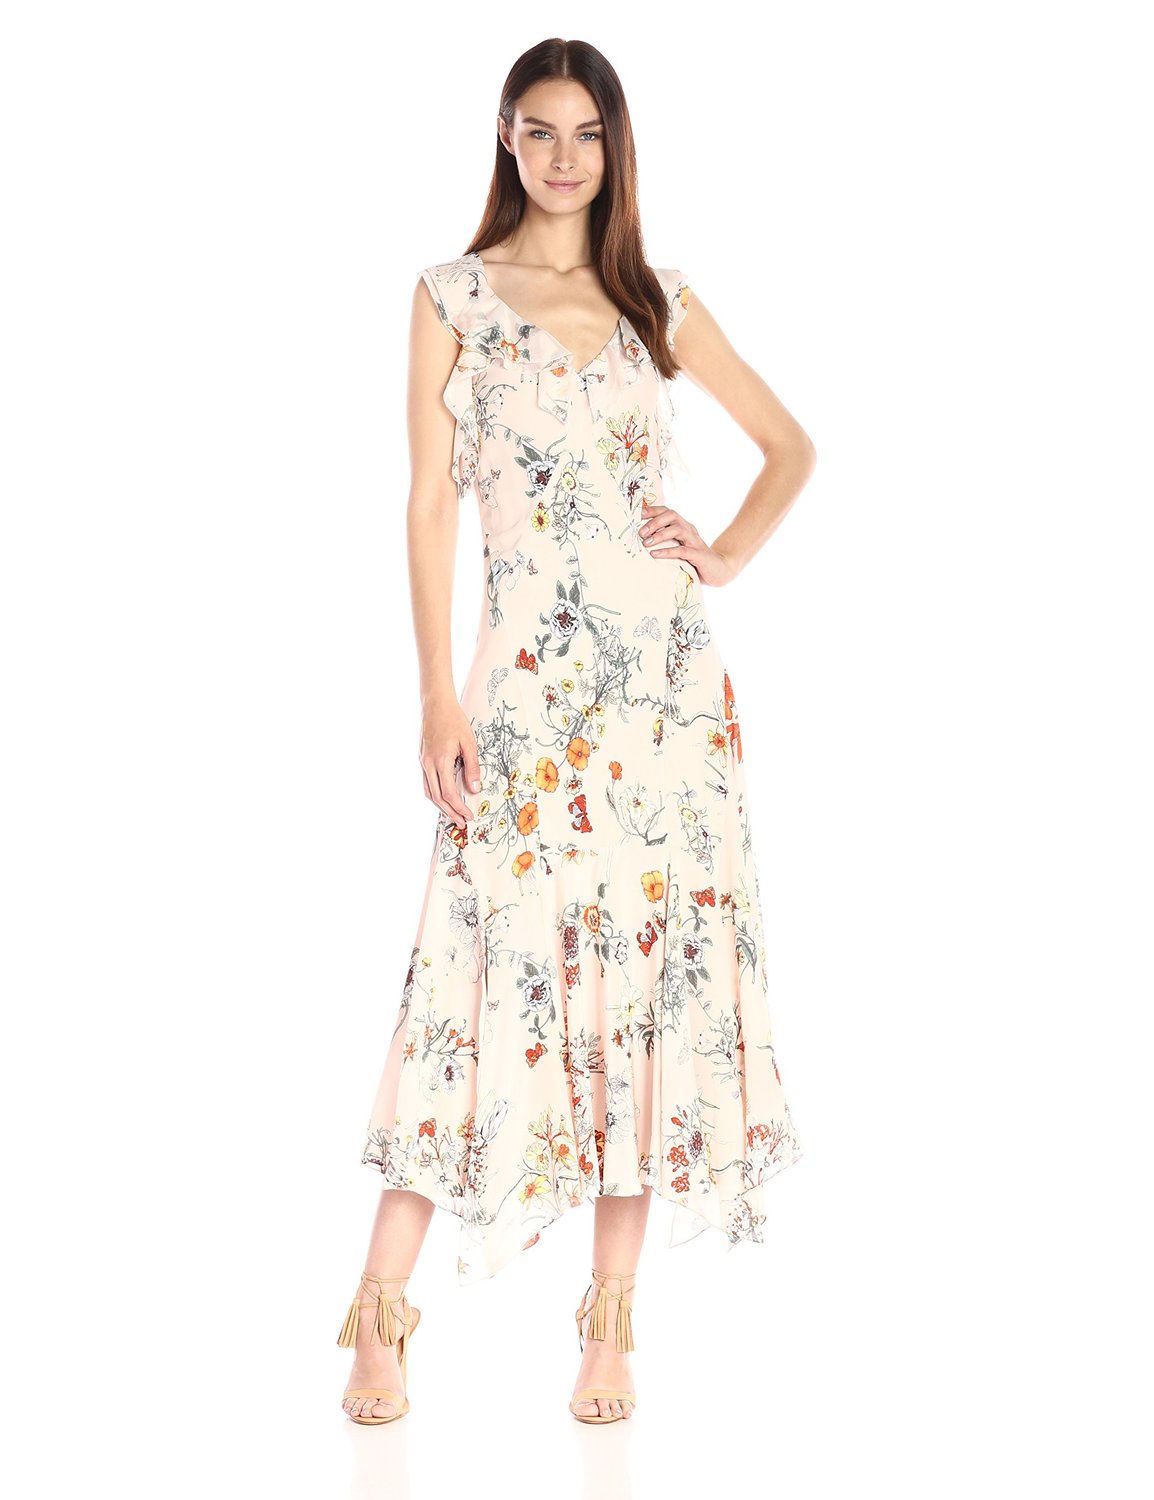 10 Best Floral Dresses for Beautiful Summer | Styles Weekly